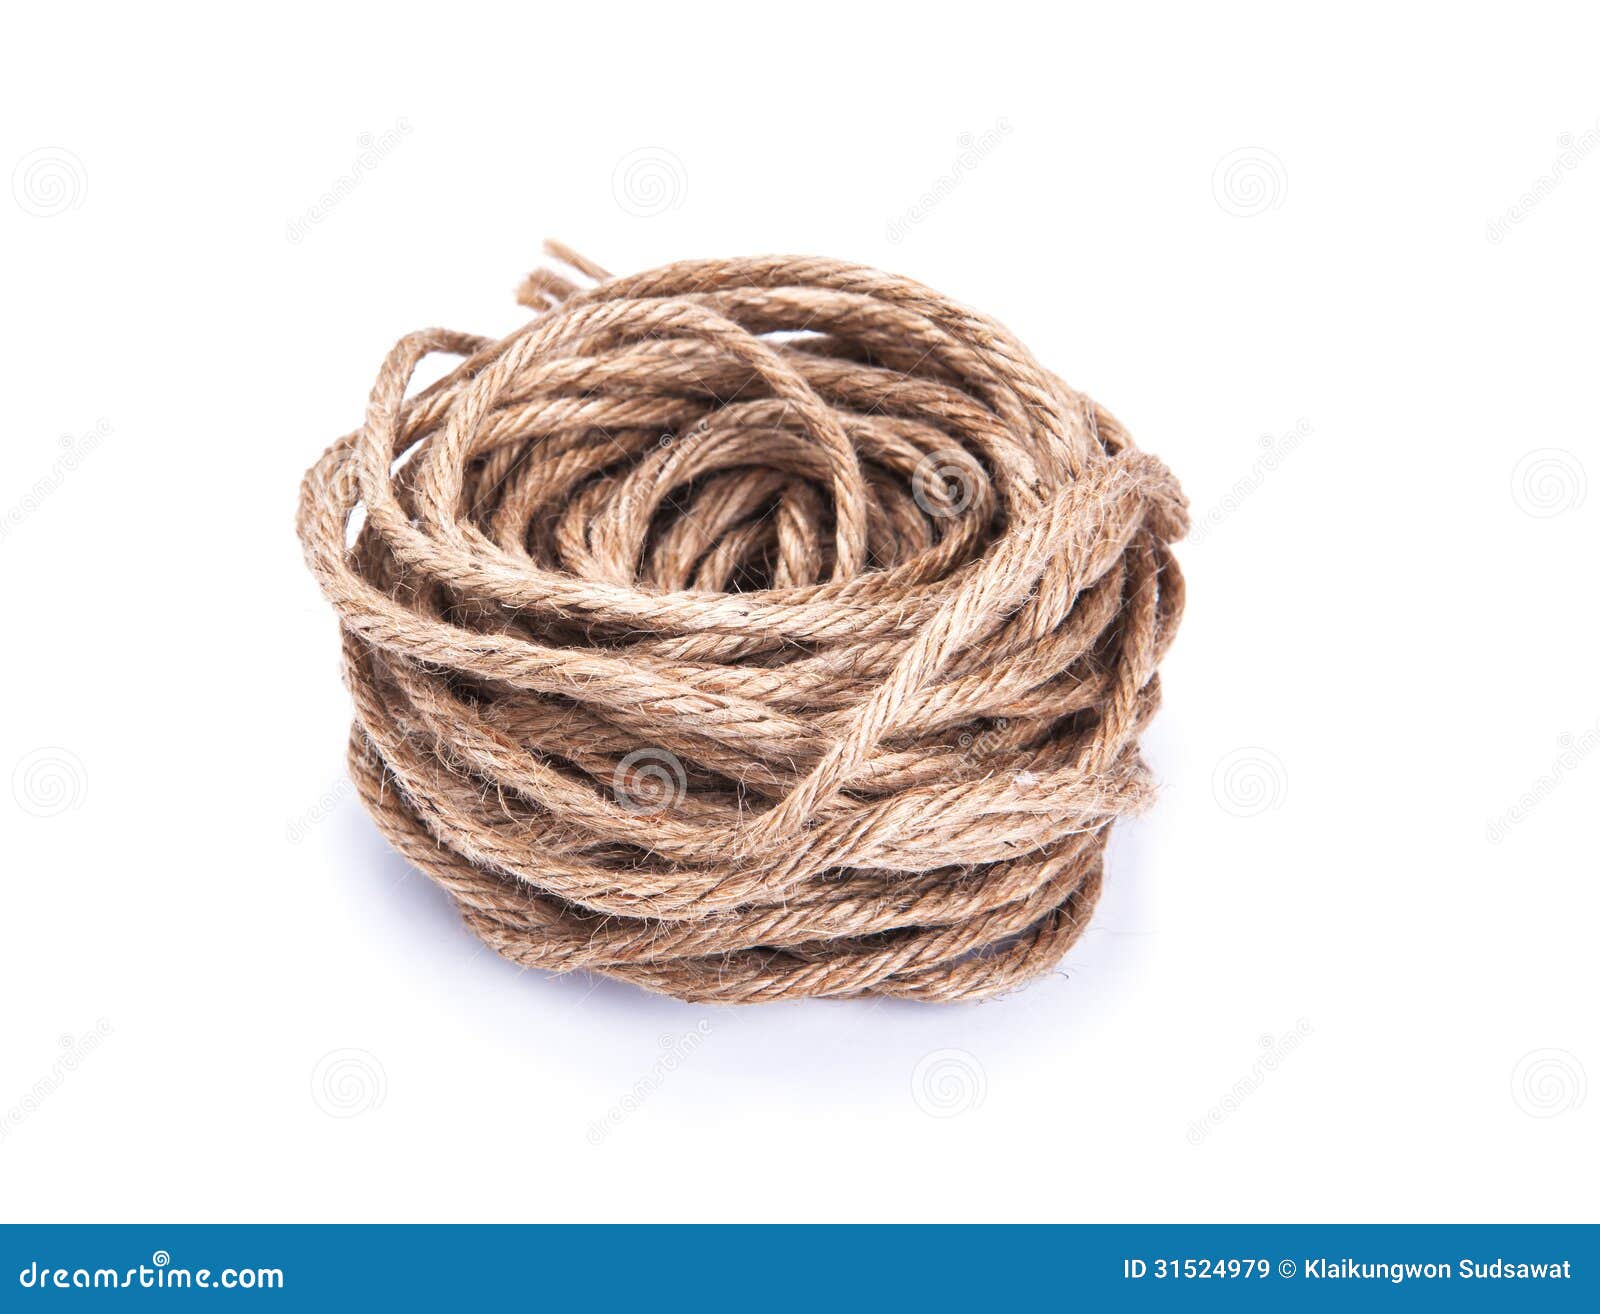 Small Rope Coiled on White Background Stock Image - Image of white, nature:  31524979